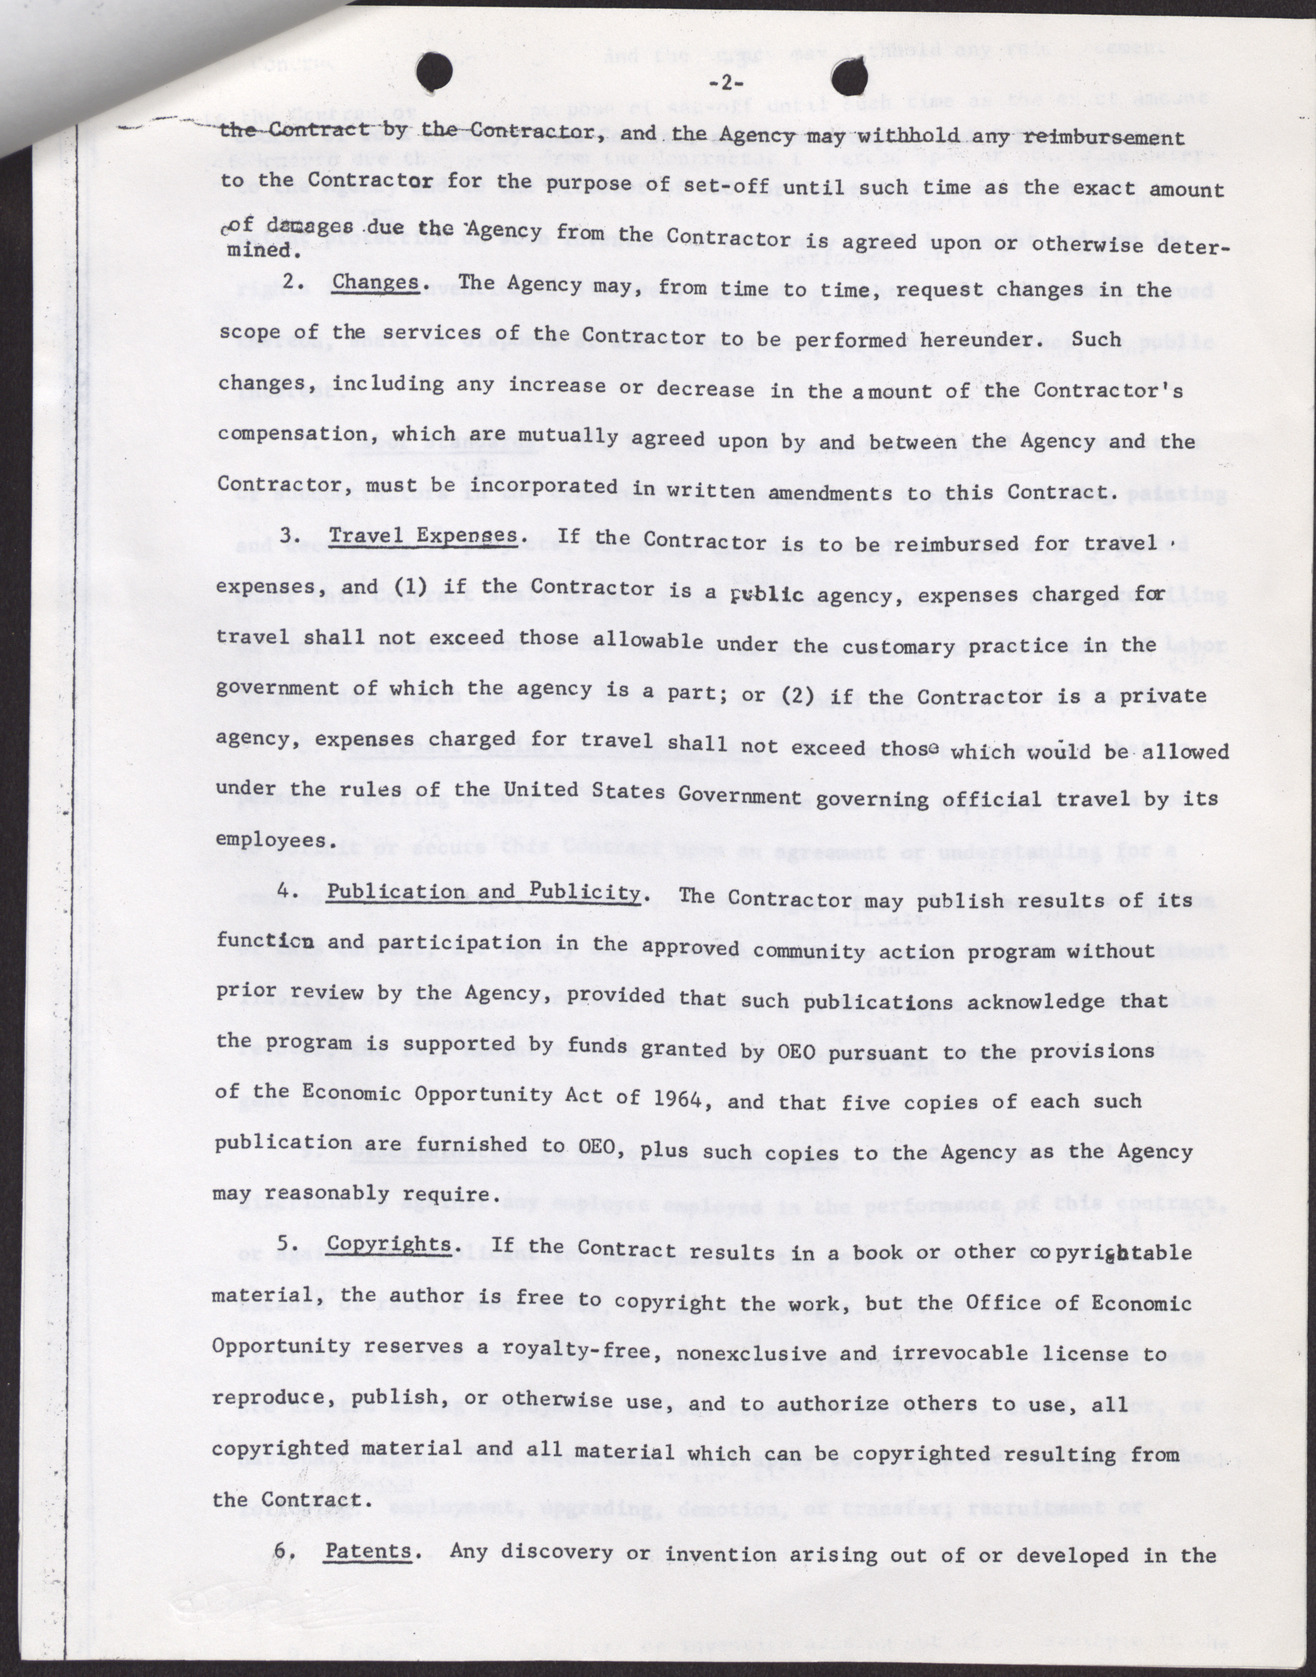 Contract of Agreement between Operation Independence and Manpower Development Center Parts I & II  (7 pages), no date, page 5